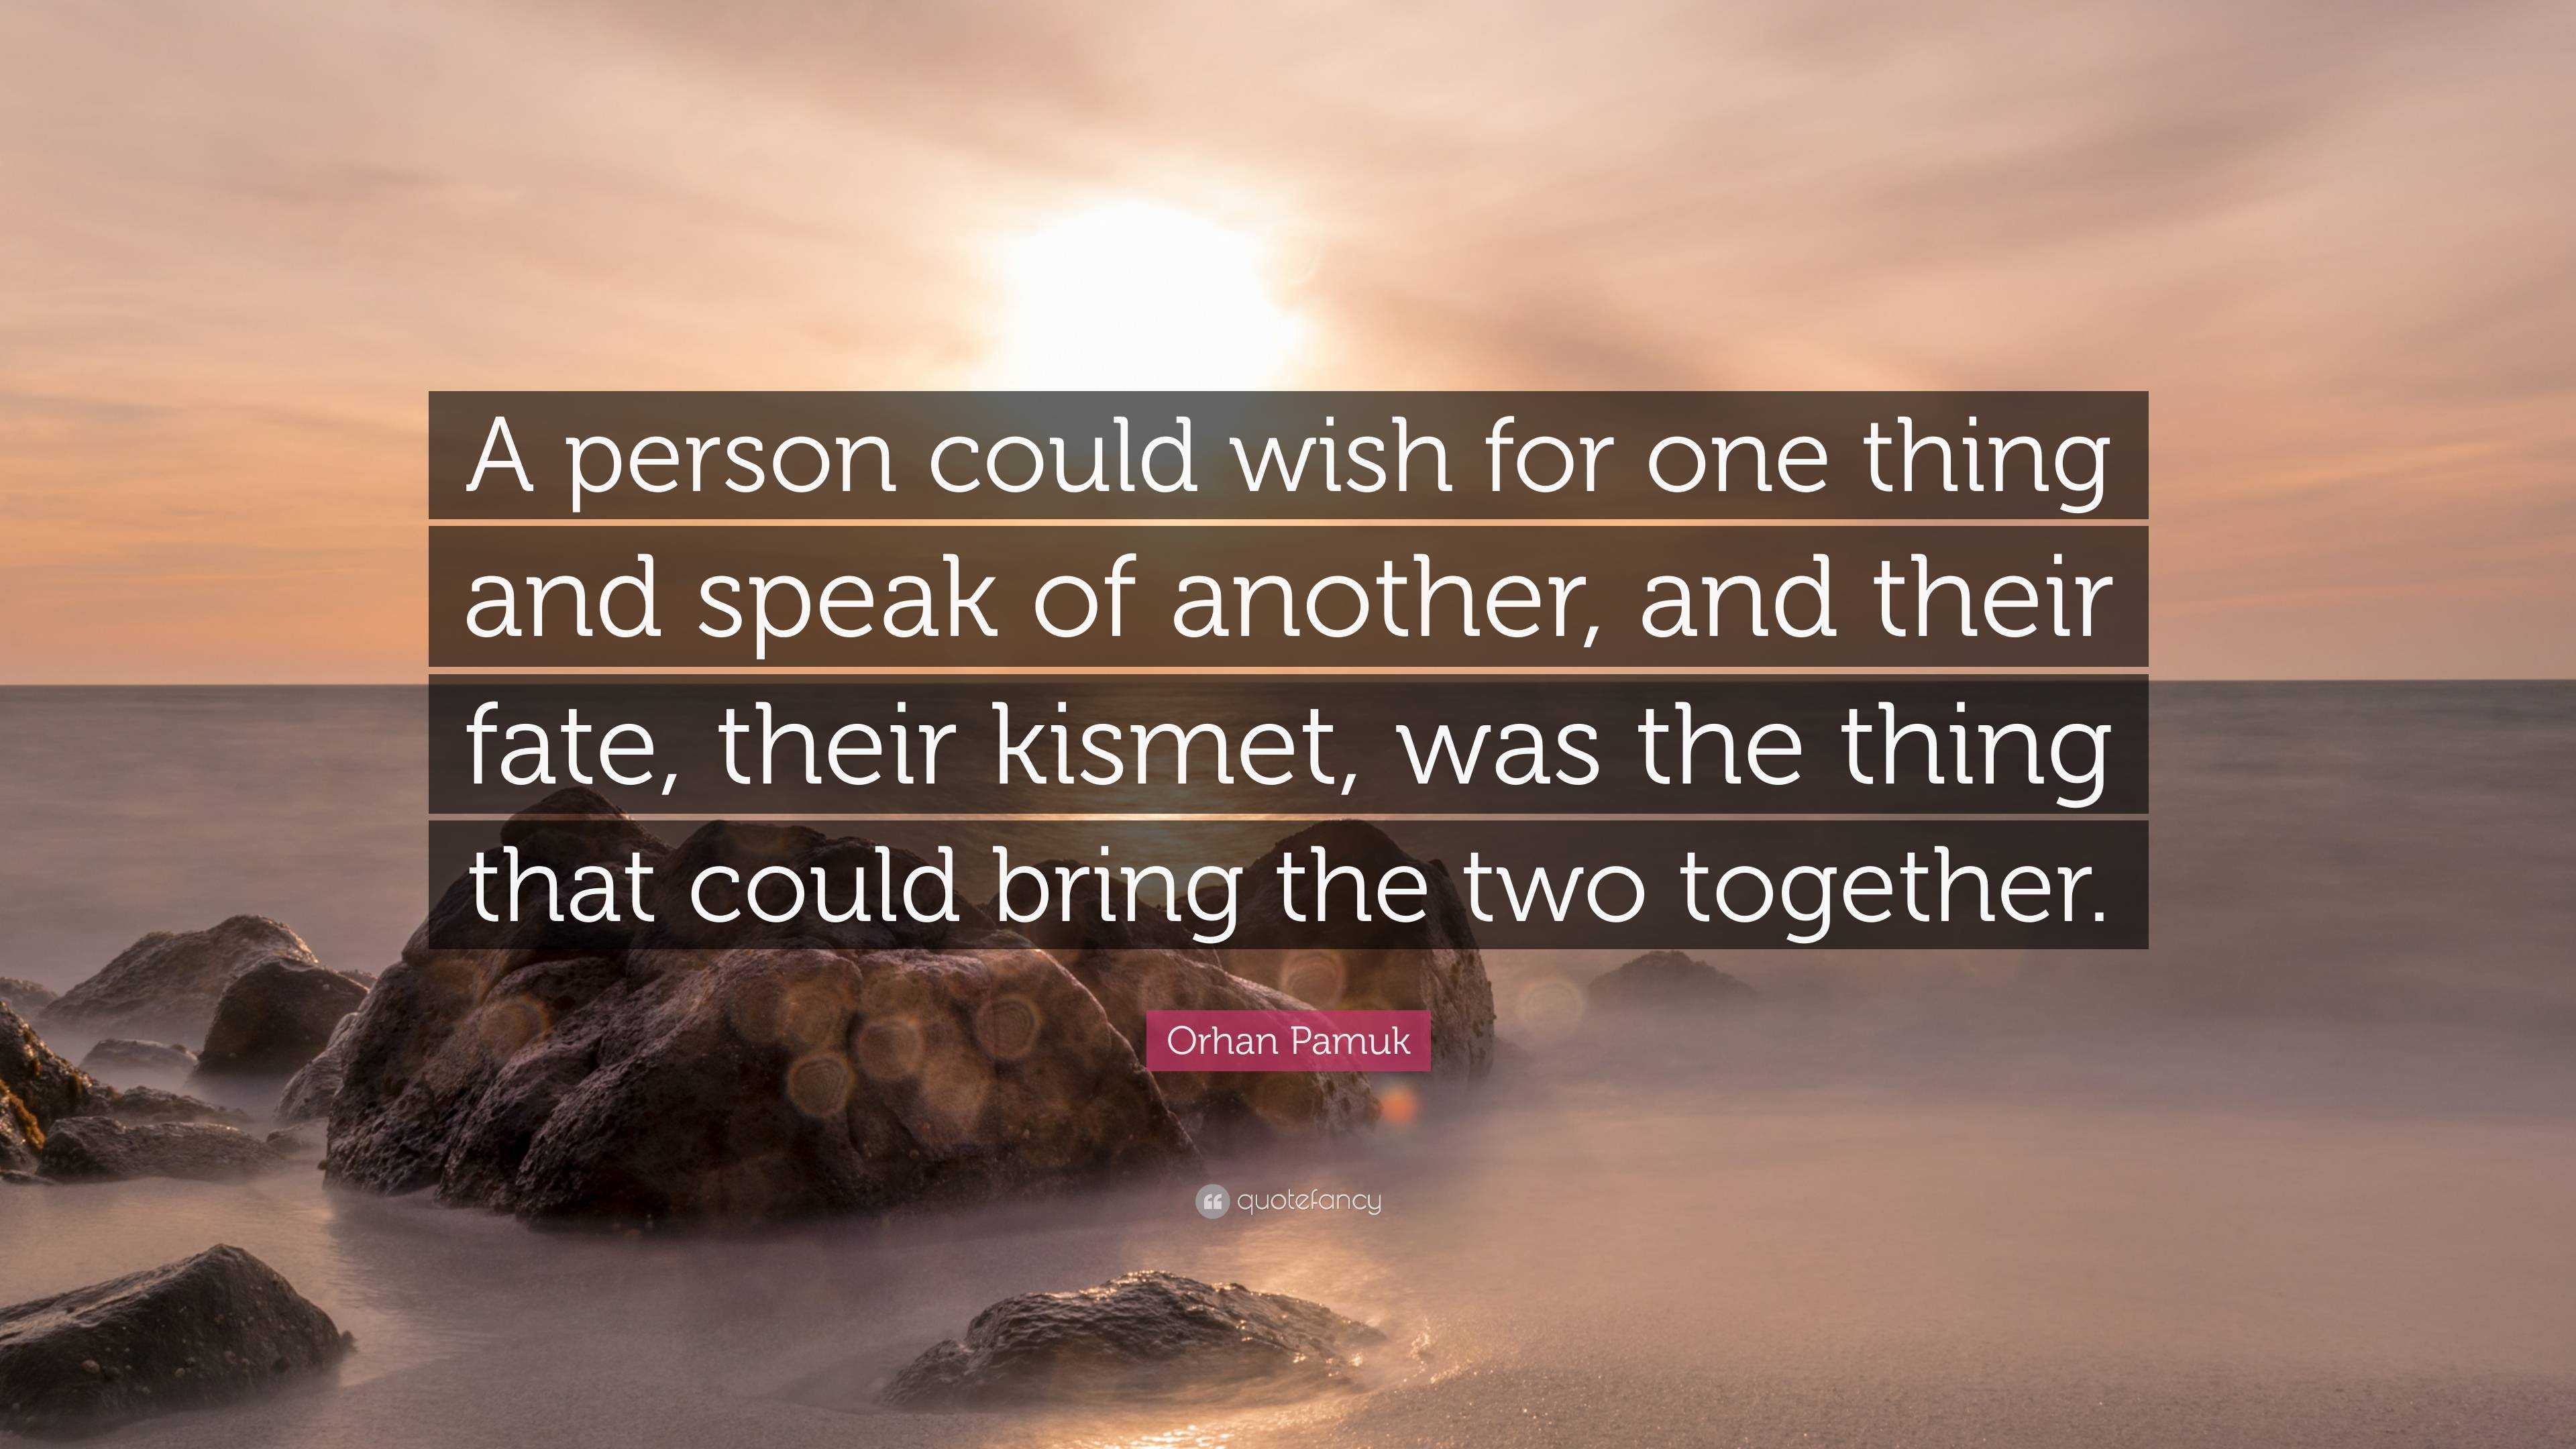 quotes about fate bringing people together